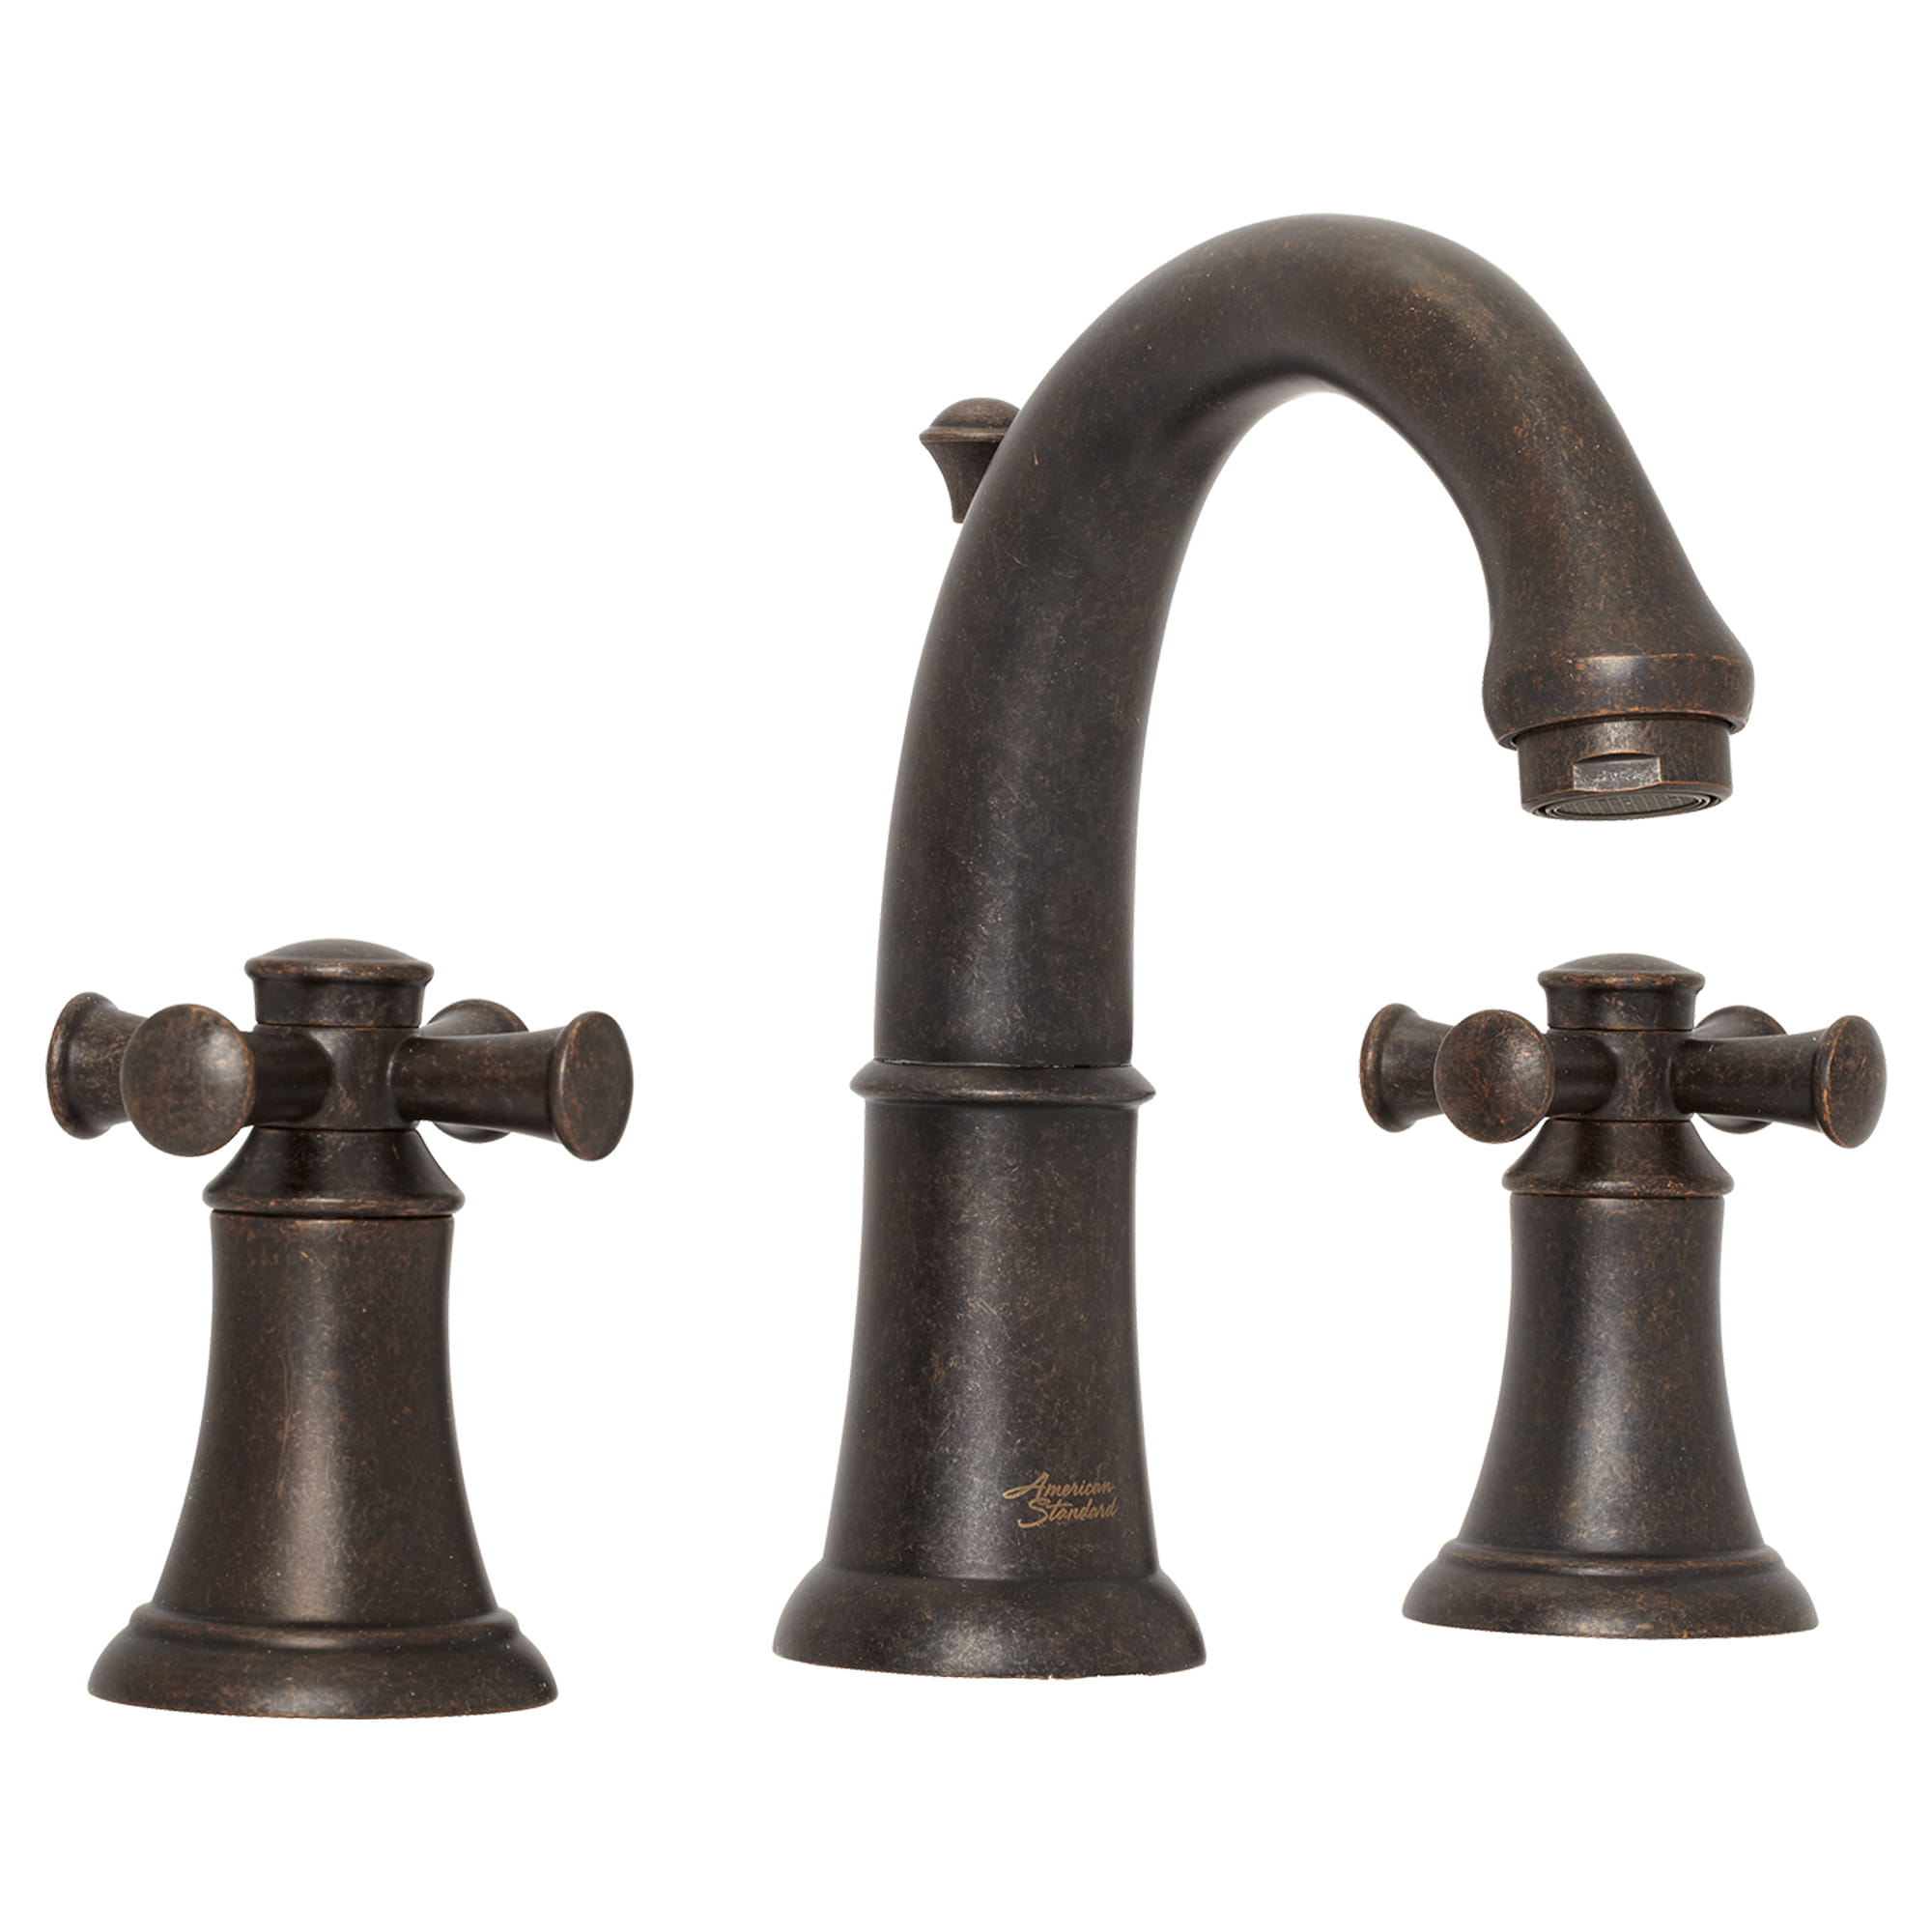 Portsmouth 8 In Widespread 2 Handle Crescent Spout Bathroom Faucet 12 GPM with Cross Handles OIL RUBBED BRONZE